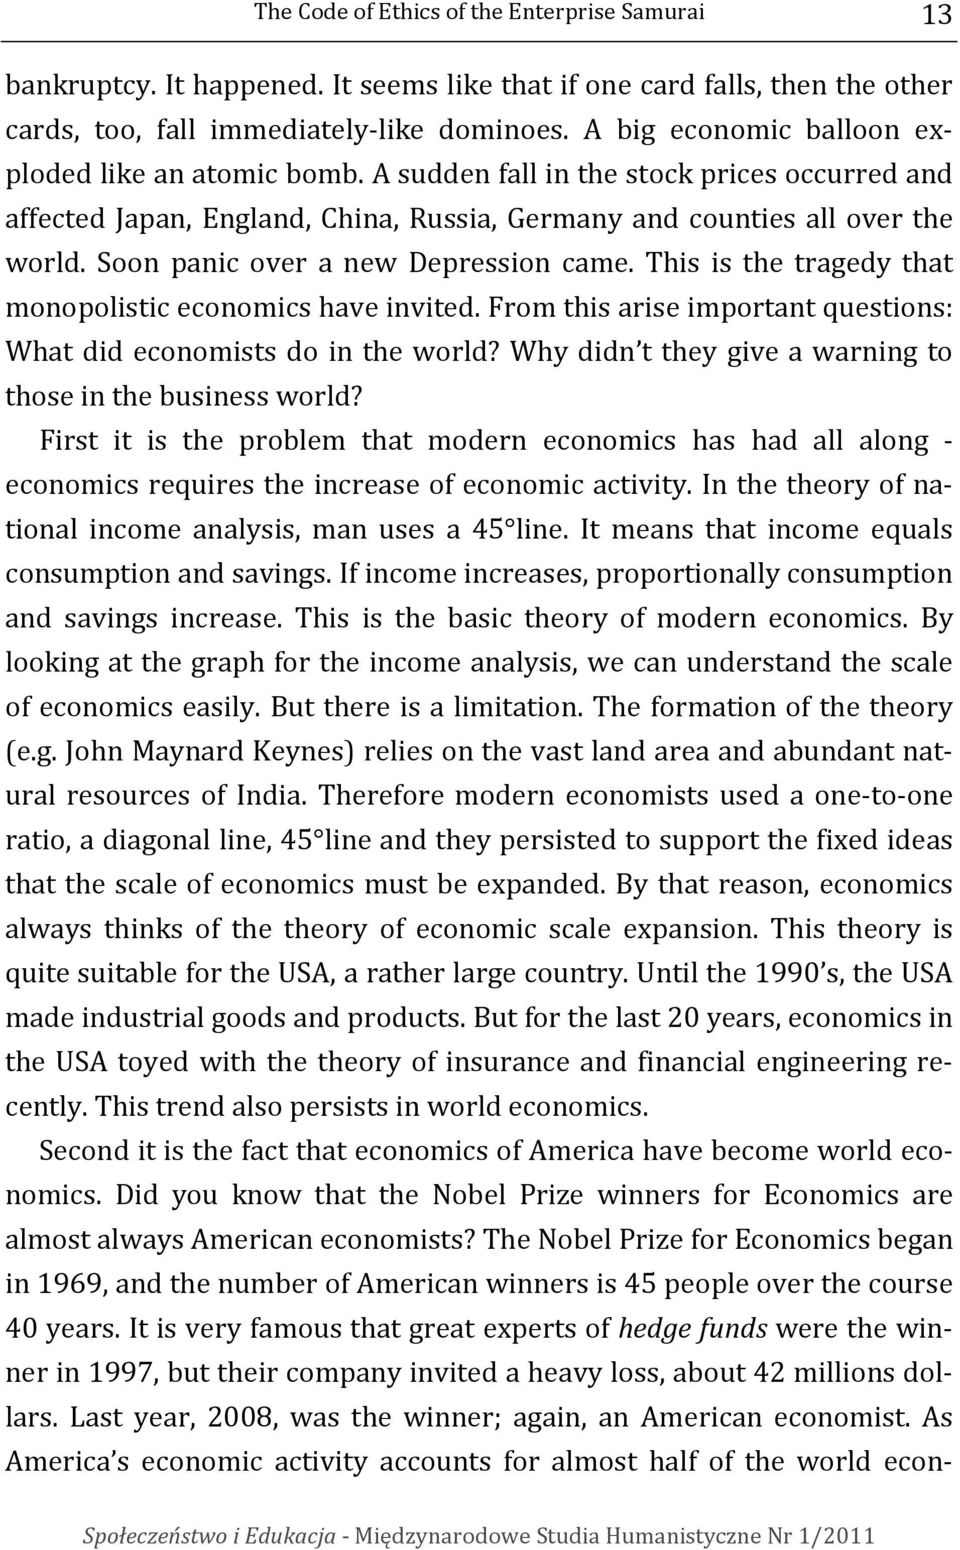 Soon panic over a new Depression came. This is the tragedy that monopolistic economics have invited. From this arise important questions: What did economists do in the world?